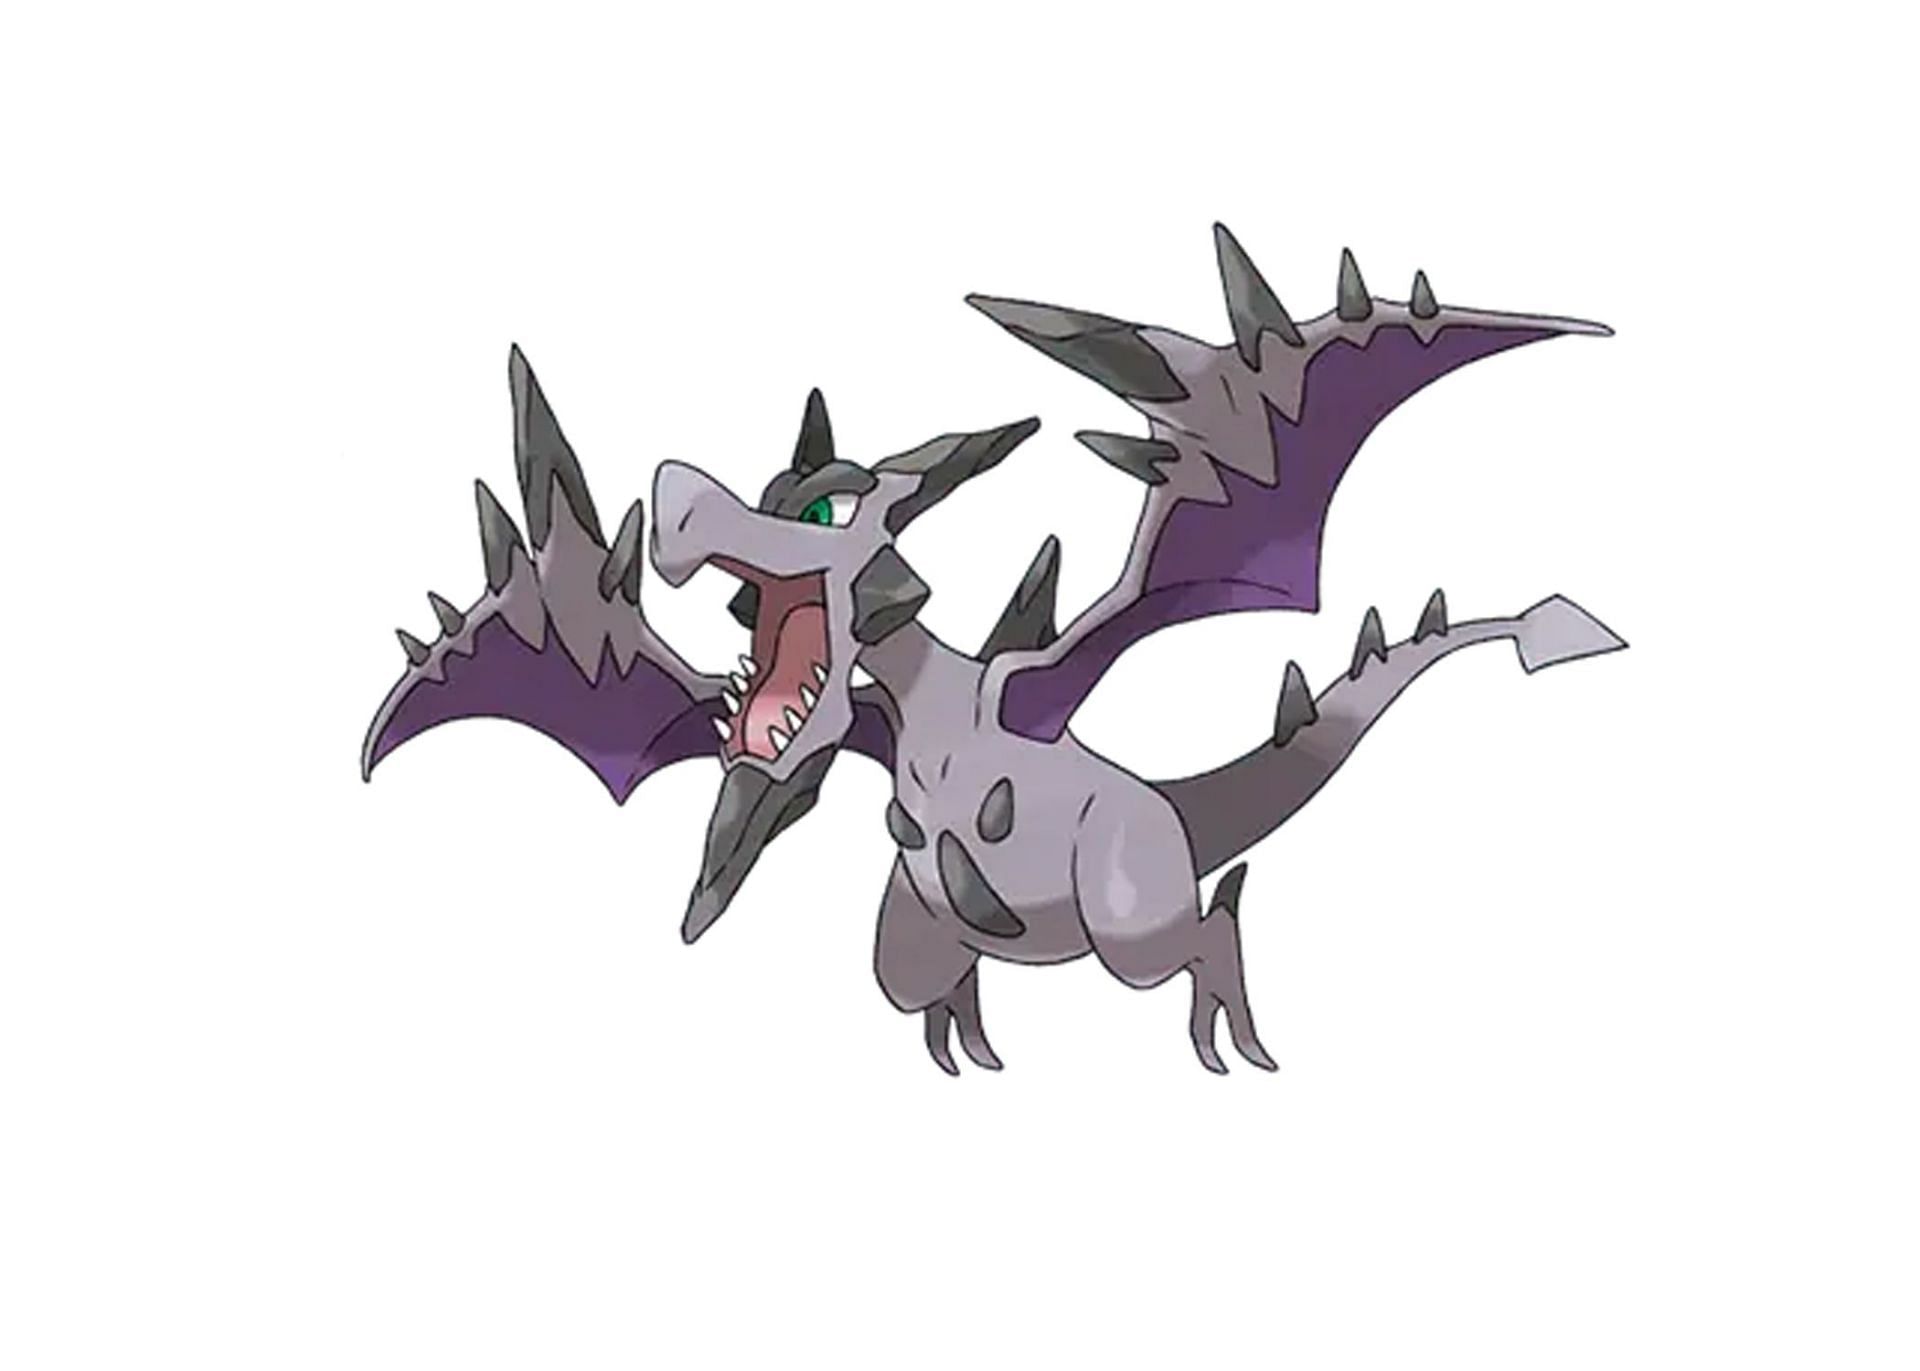 Mega Aerodactyl reigns at the top of this list (Image via Niantic)